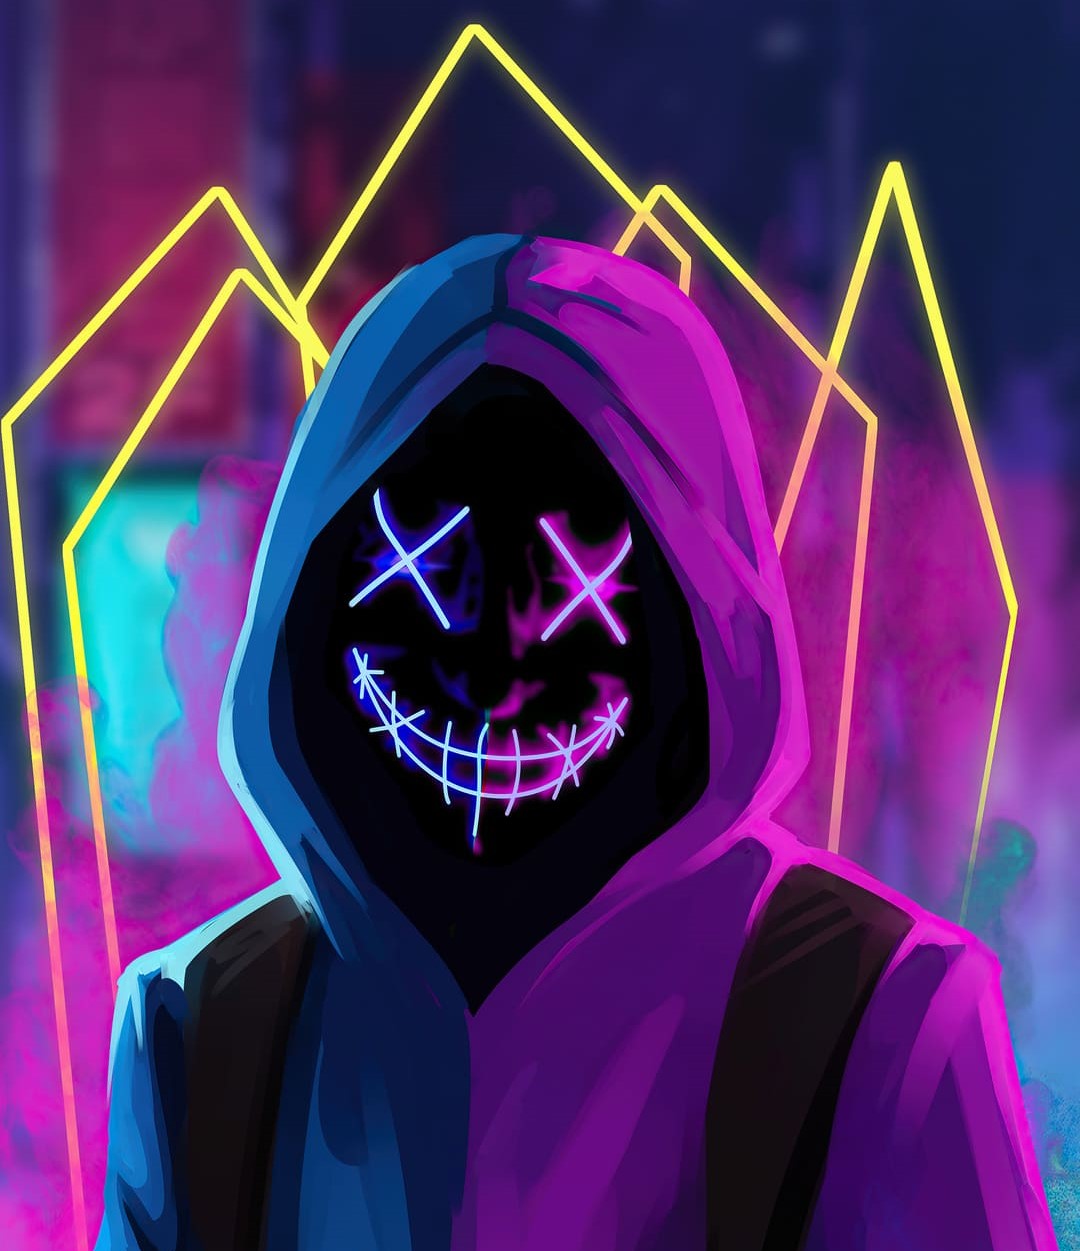 Cool profile picture for discord